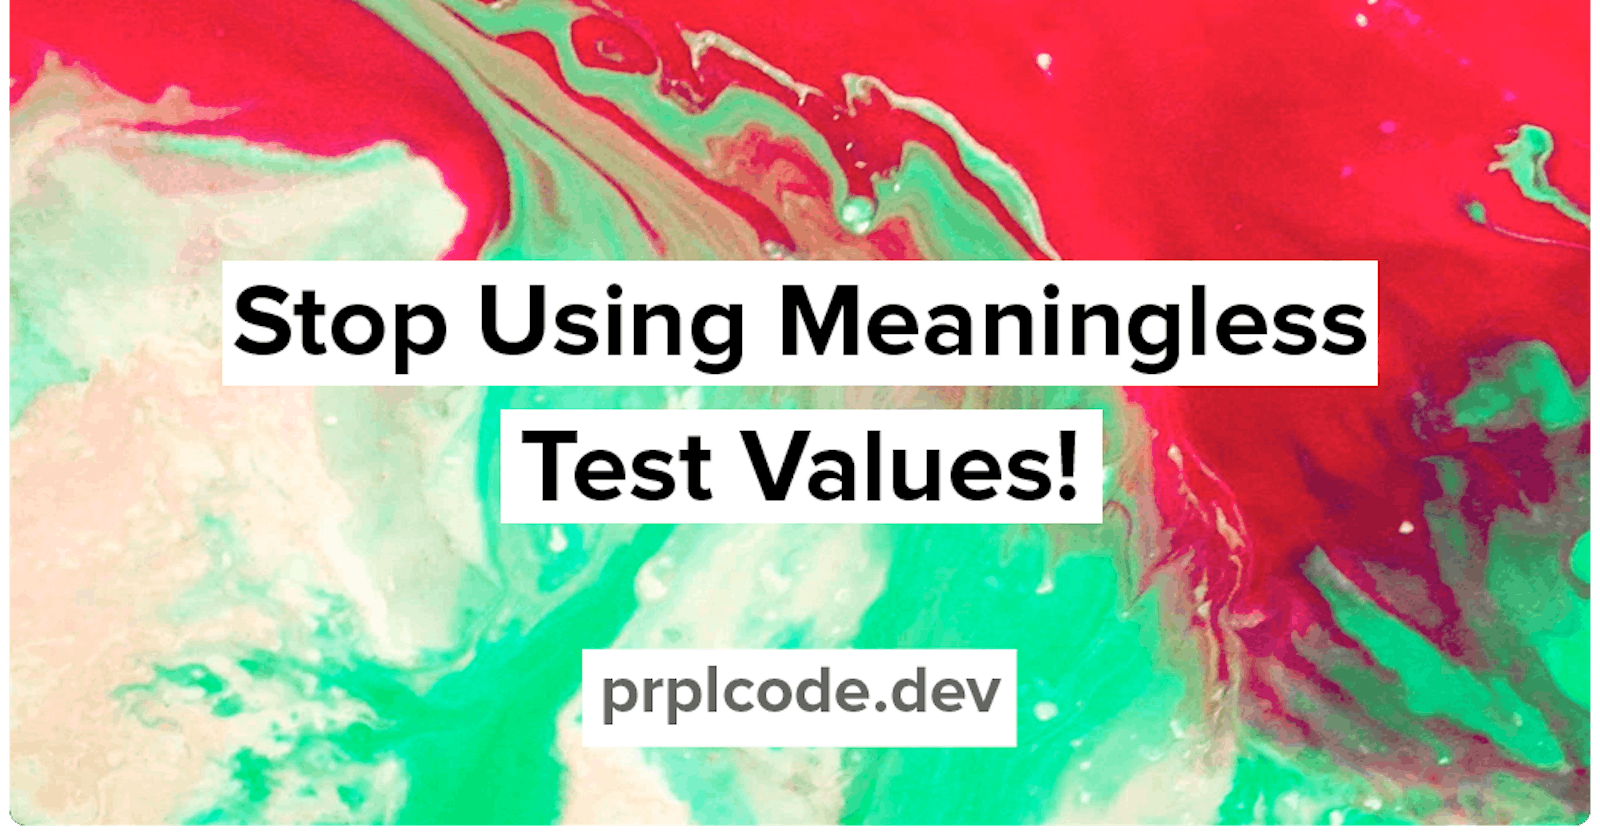 Stop Using Meaningless Test Values!